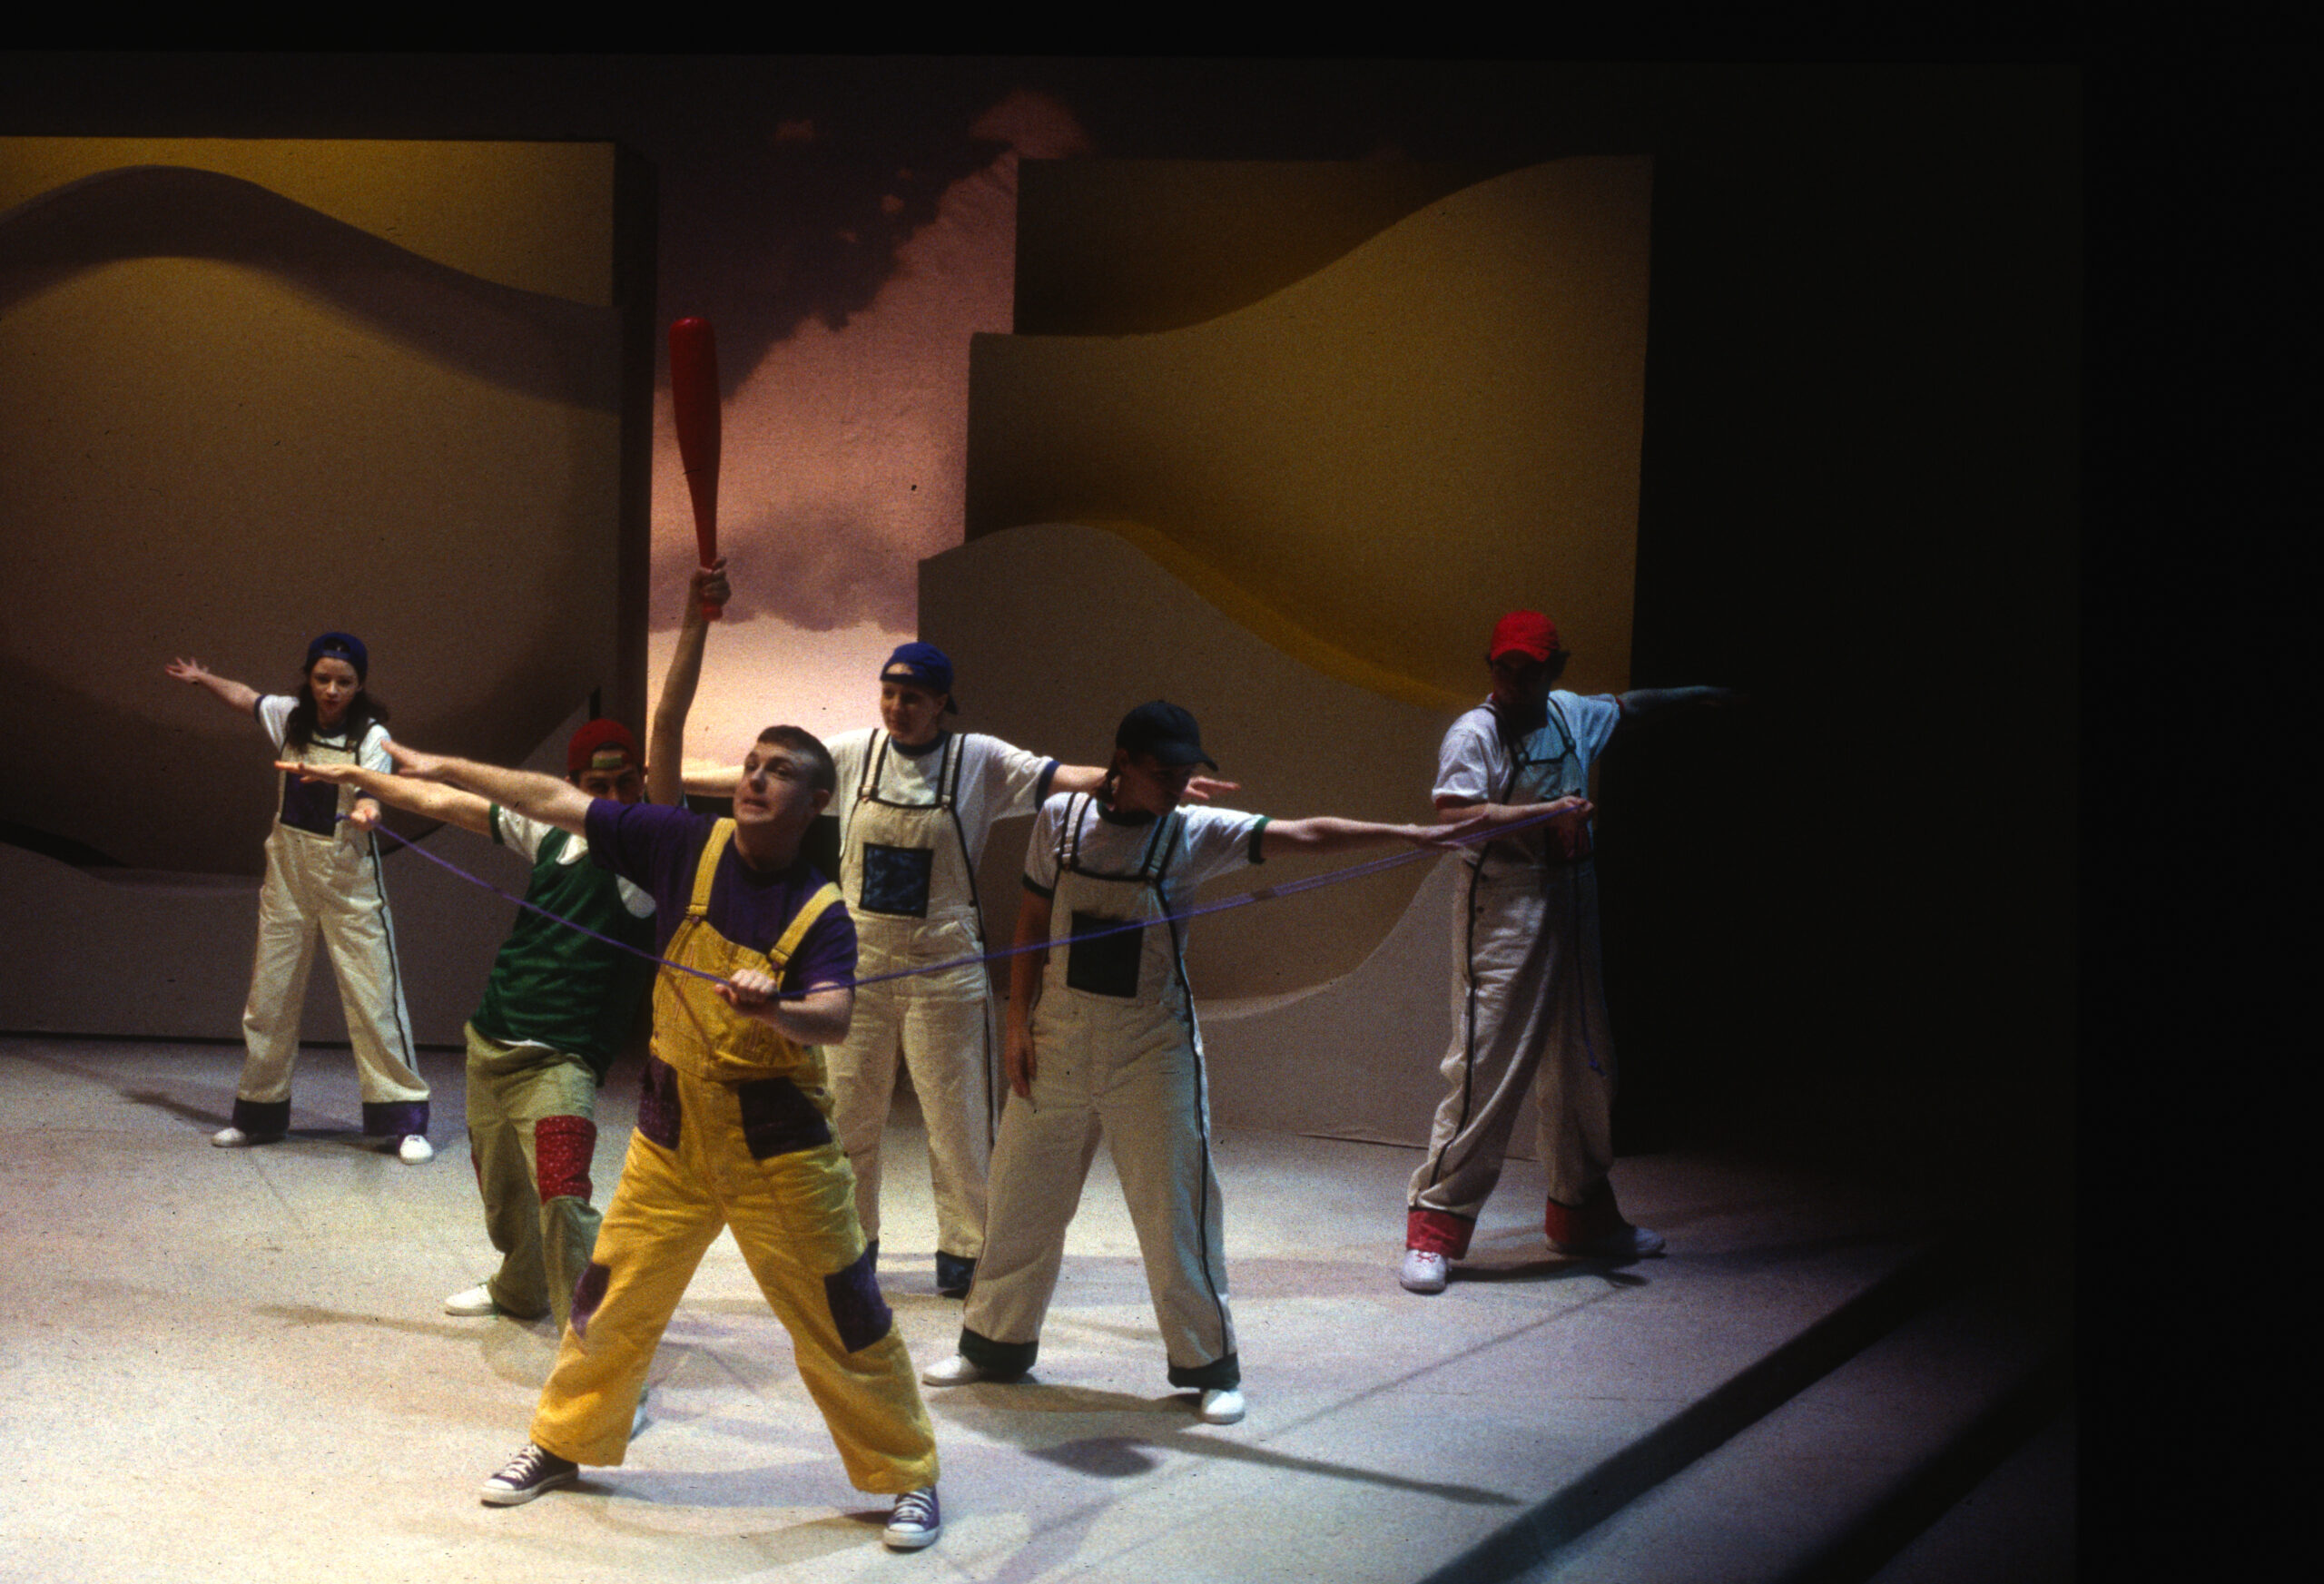 Actors perform The Yellow Boat on the Weisiger Theatre stage.